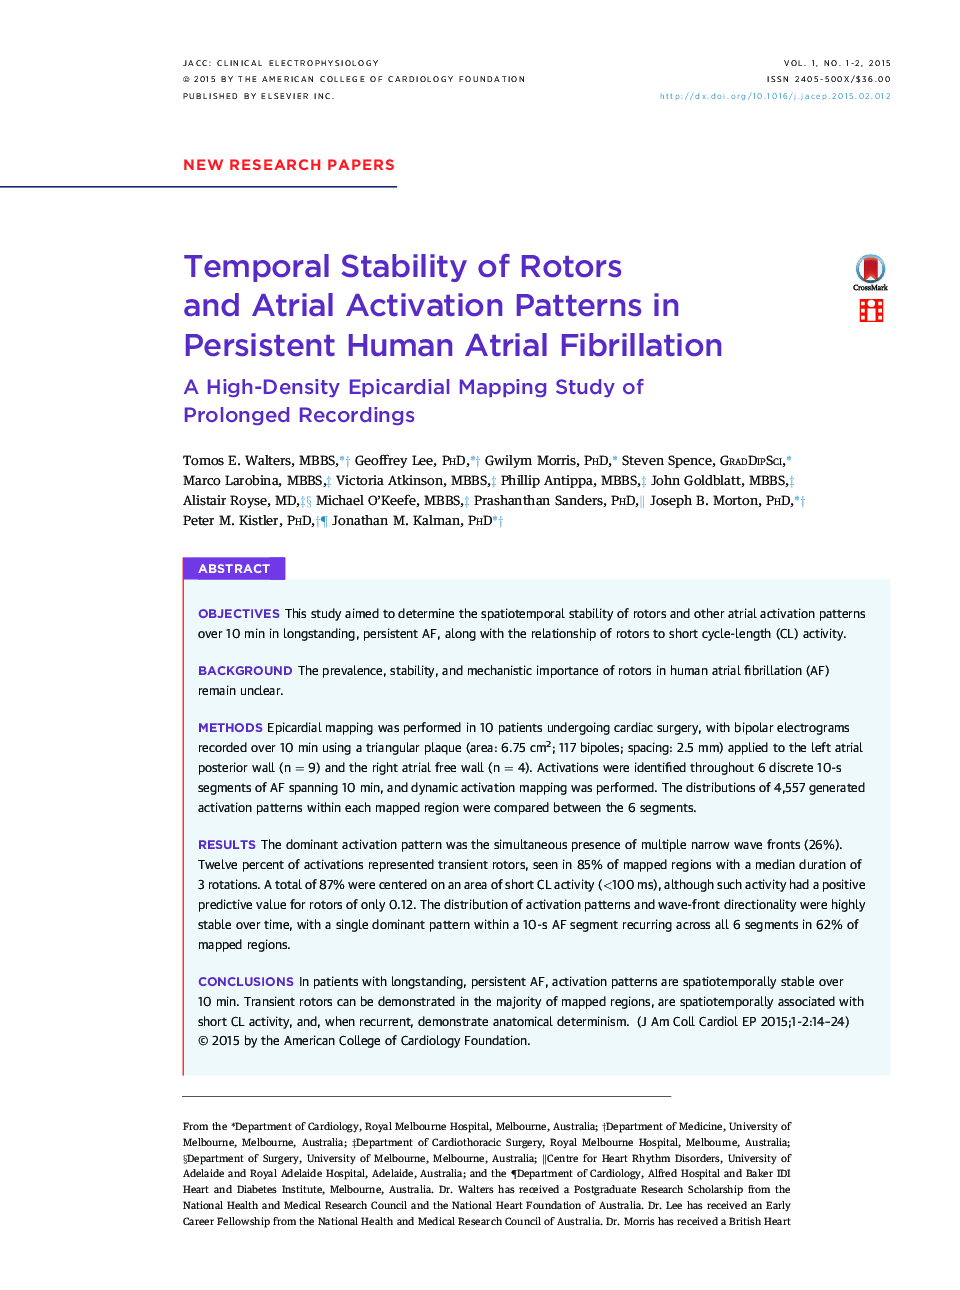 Temporal Stability of Rotors and Atrial Activation Patterns in Persistent Human Atrial Fibrillation : A High-Density Epicardial Mapping Study of Prolonged Recordings